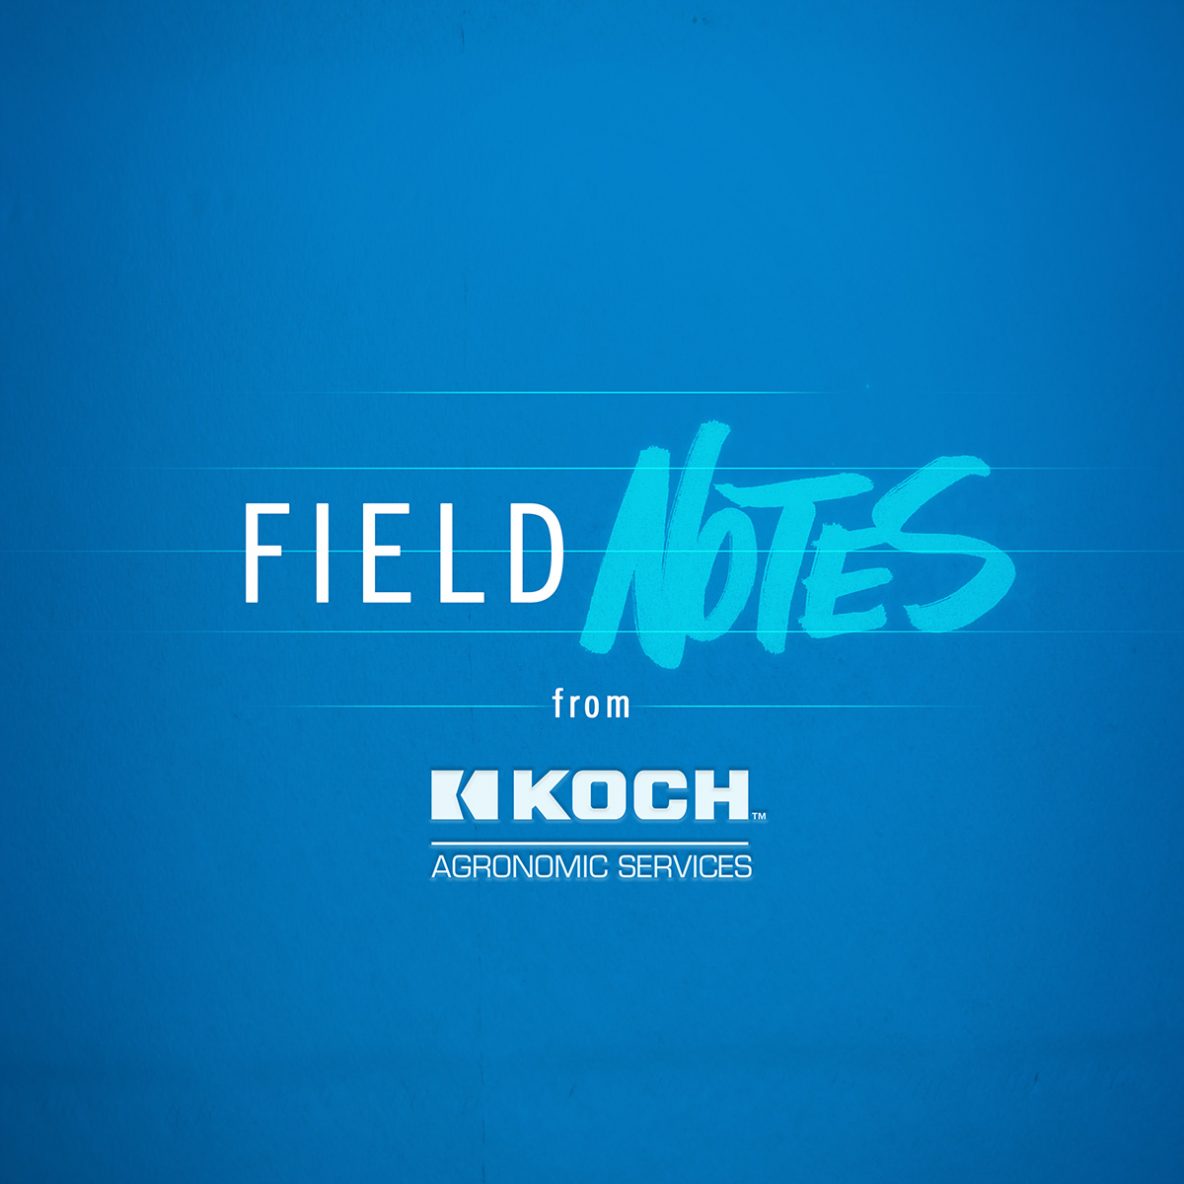 Field Notes from Koch Agronomic Services